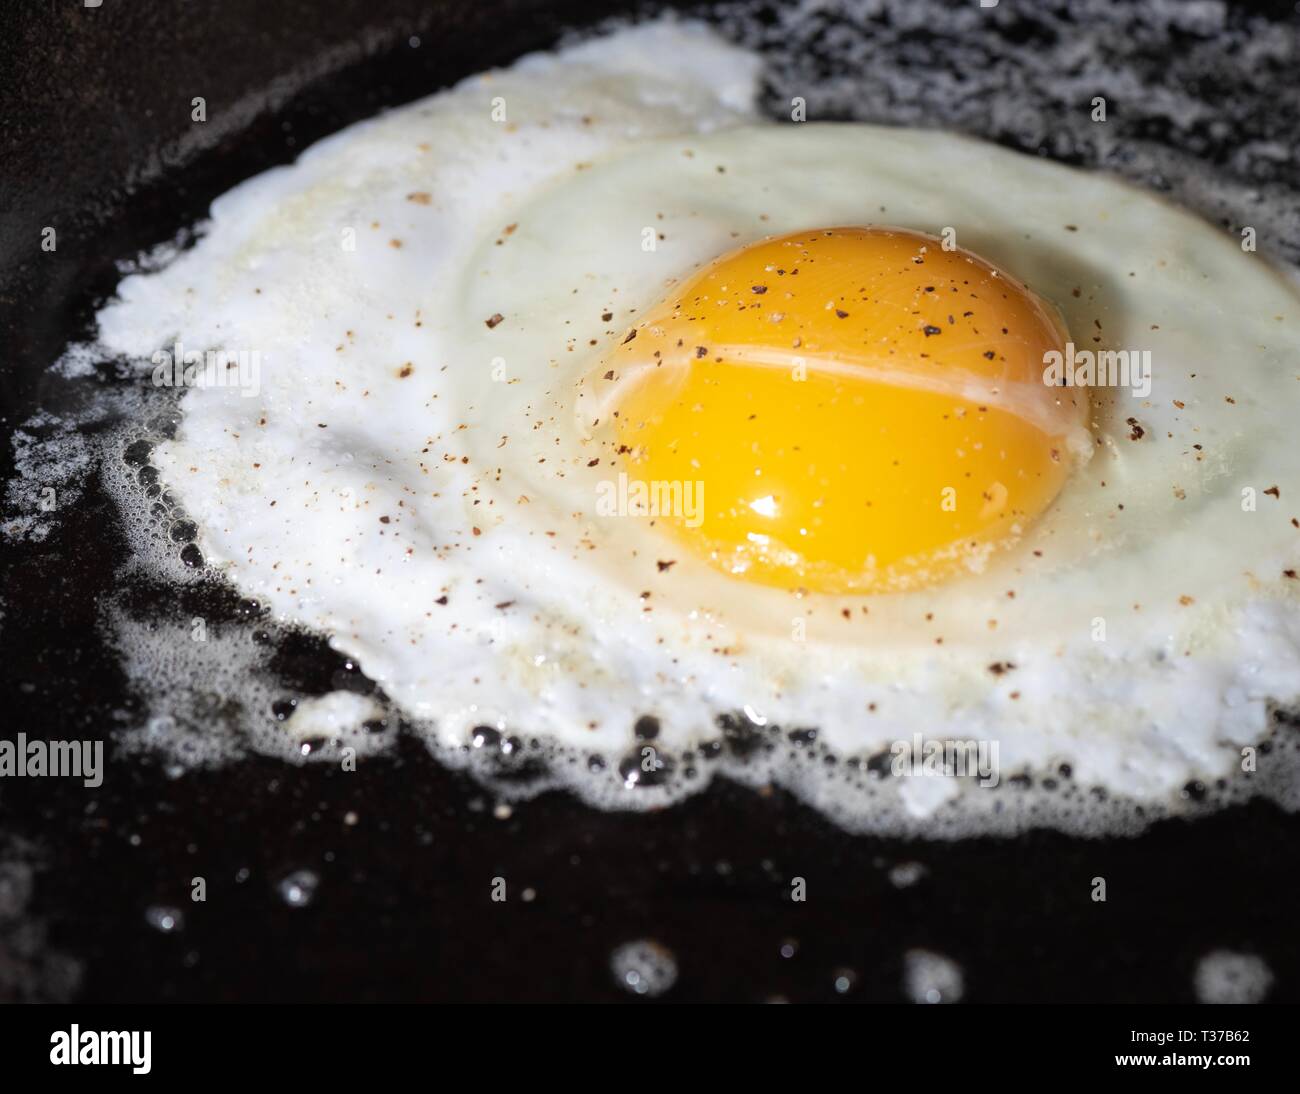 Frying egg sprinkled with salt and pepper. Stock Photo